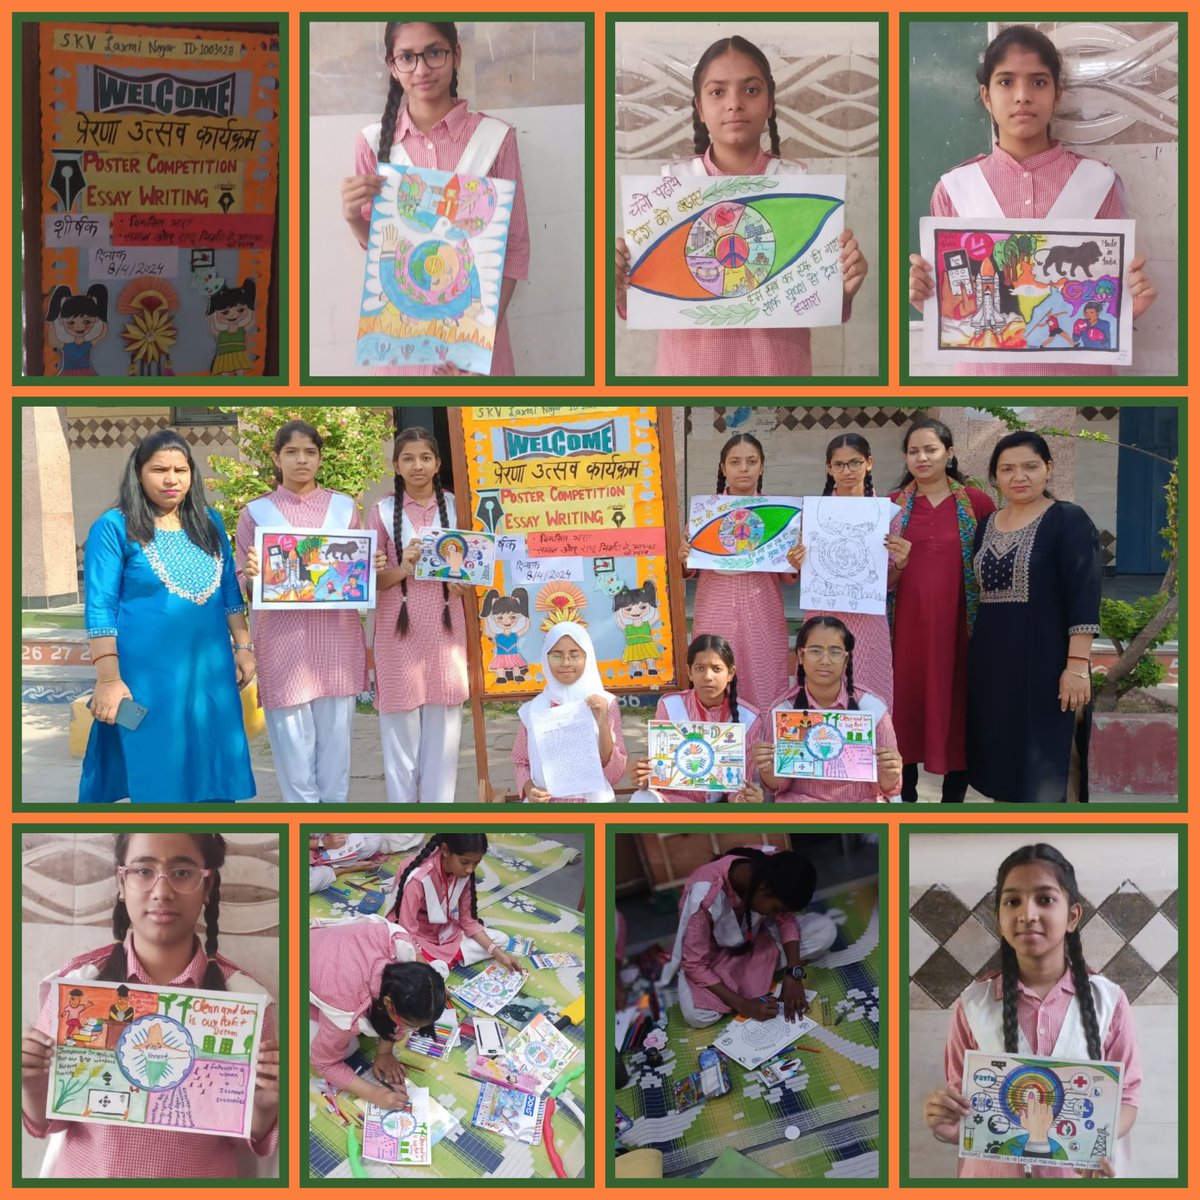 8/4/24 PRERNA UTSAV Celebrated @1003028 with Competitions for 9-12Class Students in Essay,story,poem✍️ ,postermaking Topics :- ◇My contribution towards Society and Nation development ◇Viksit Bharat #participation #prizes @Dir_Education @DSTF_2020 @ChhaviGupta_04